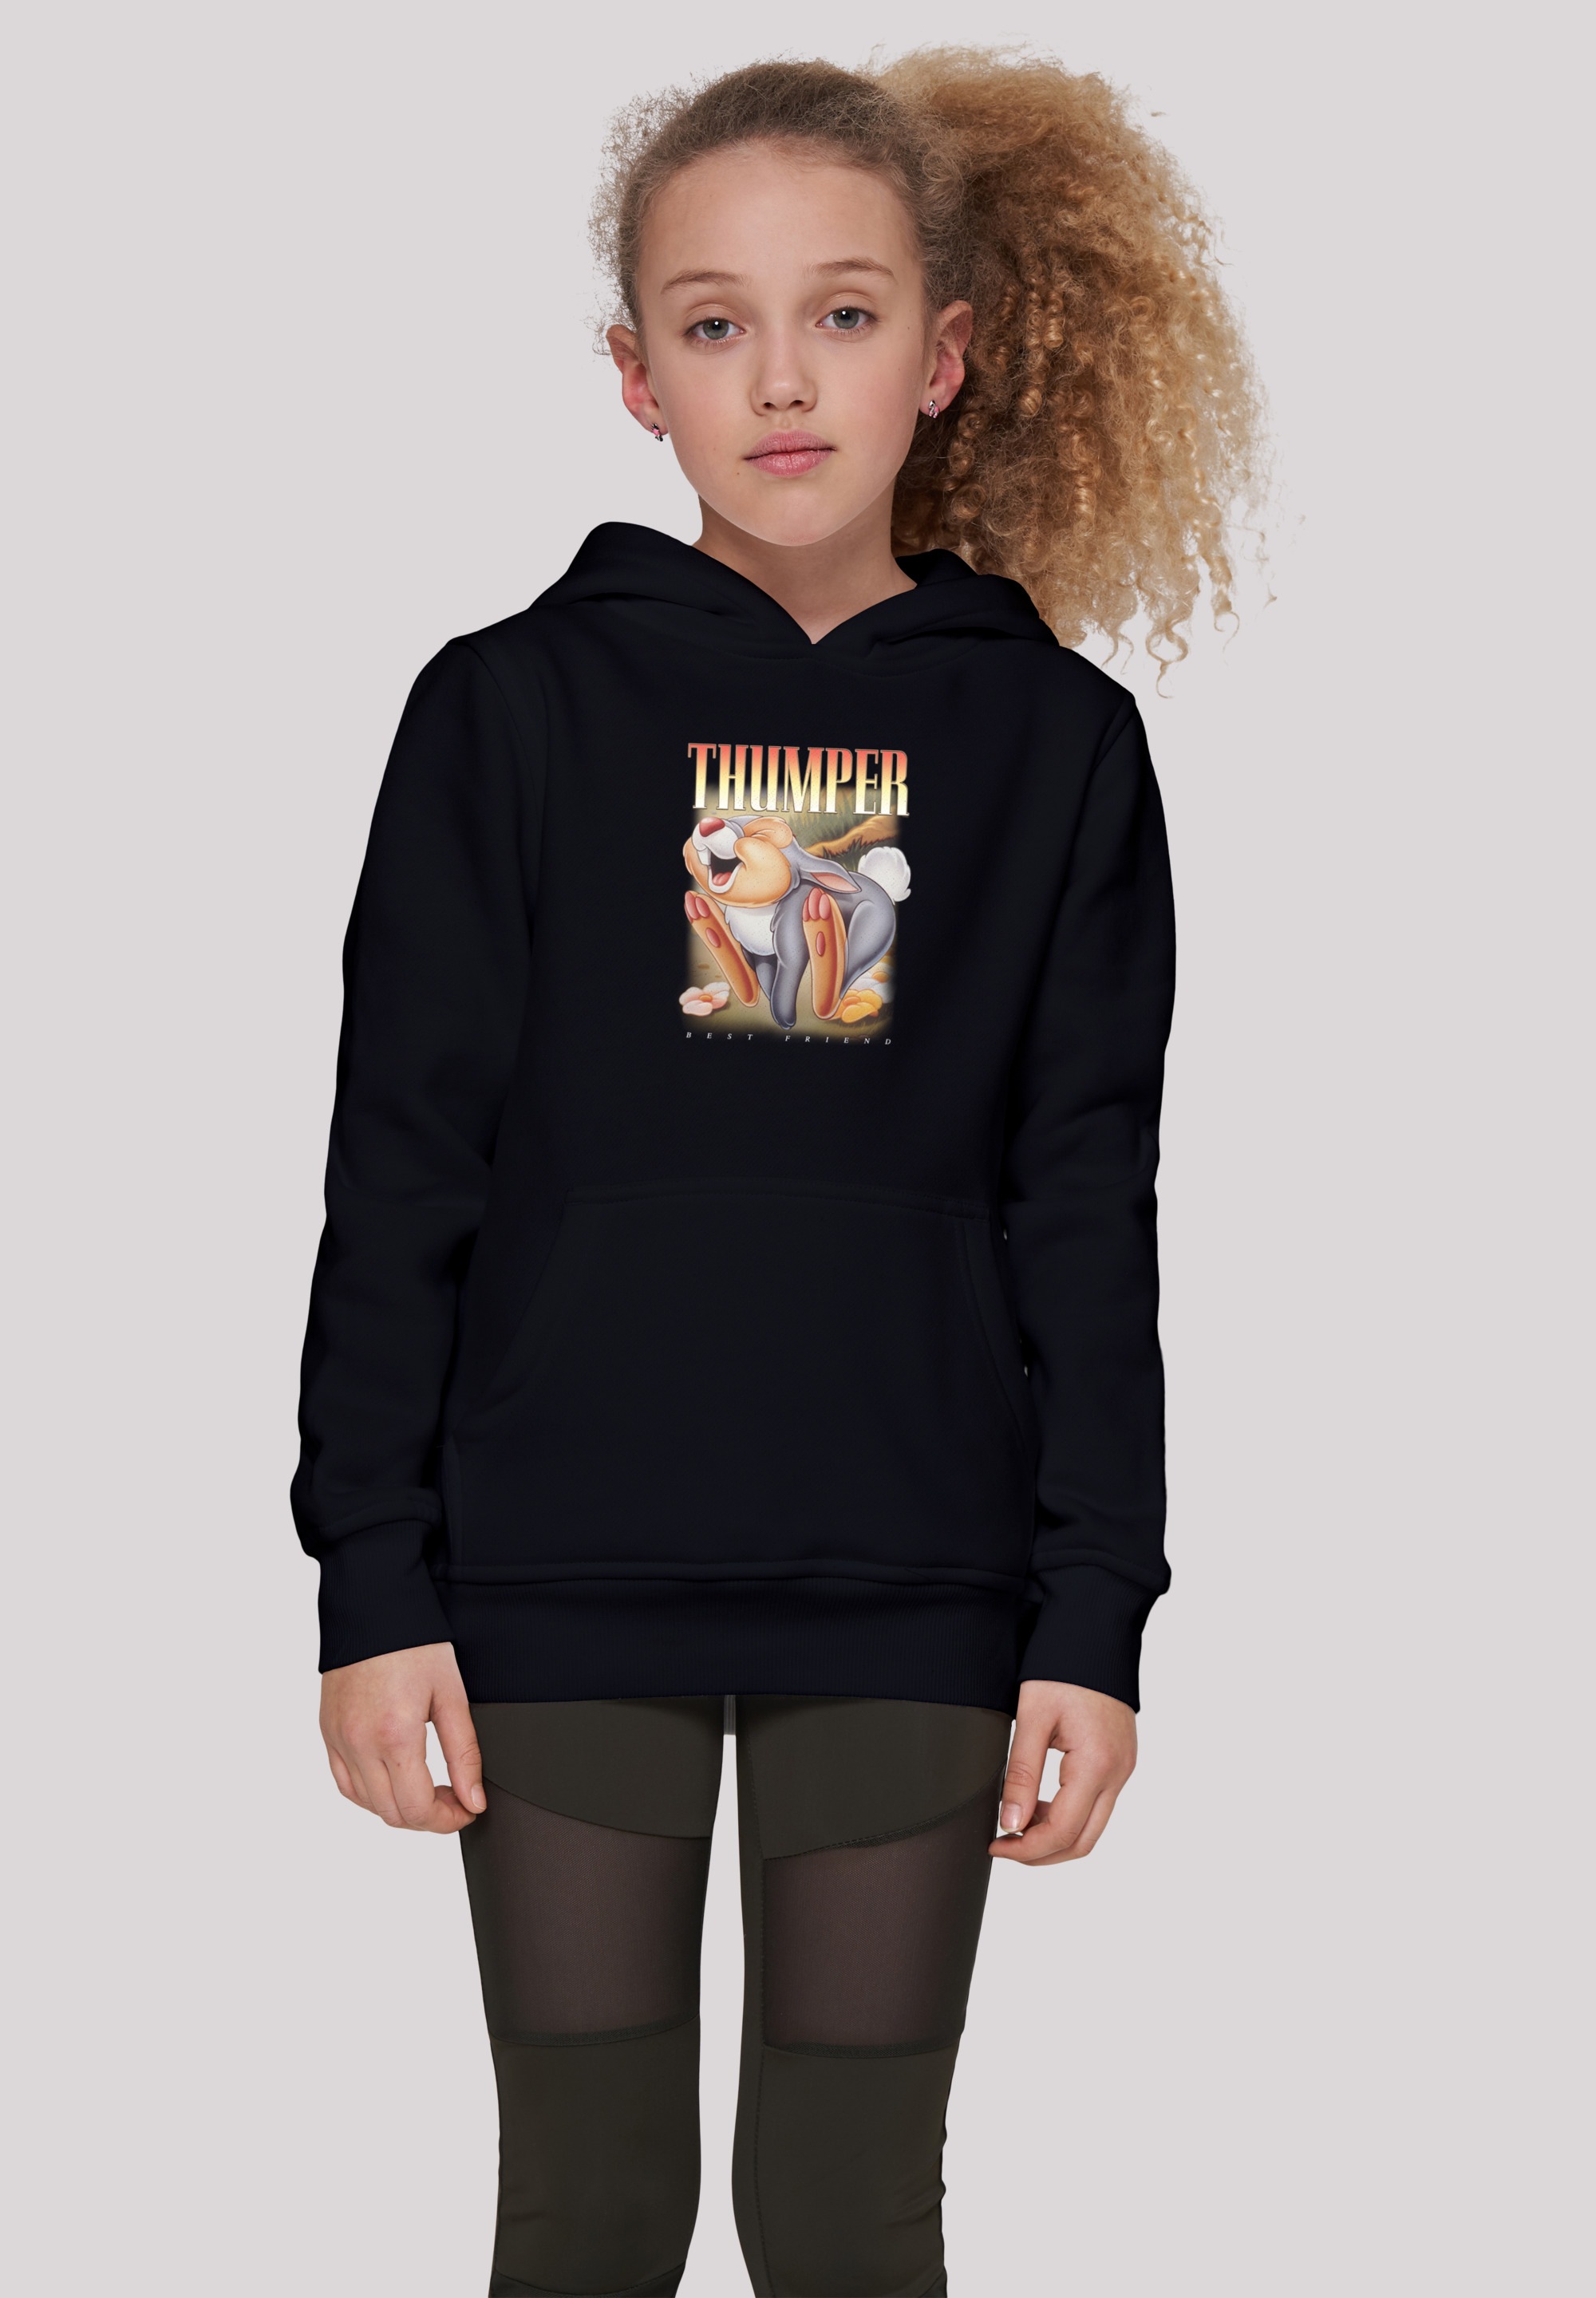 F4NT4STIC Hoodie »F4NT4STIC Kinder Bambi Thumper Montage with Basic Kids Hoody«, (1 tlg.)